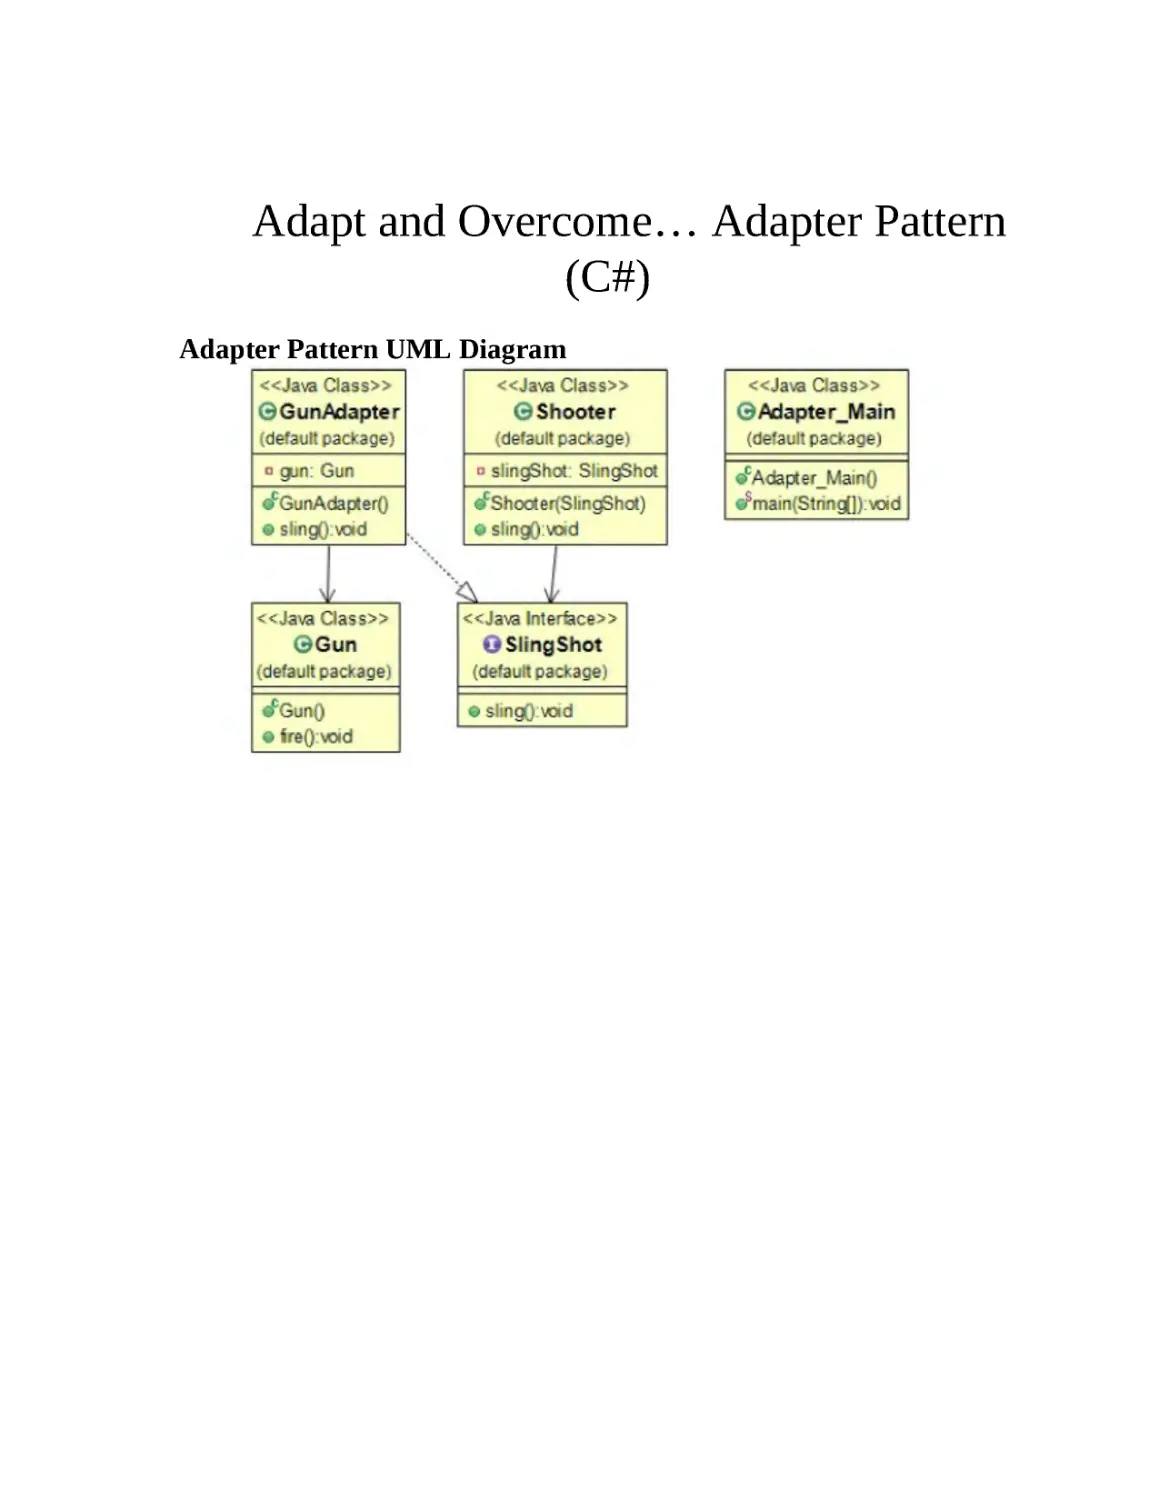 ﻿Adapt and Overcome… Adapter Pattern øC#